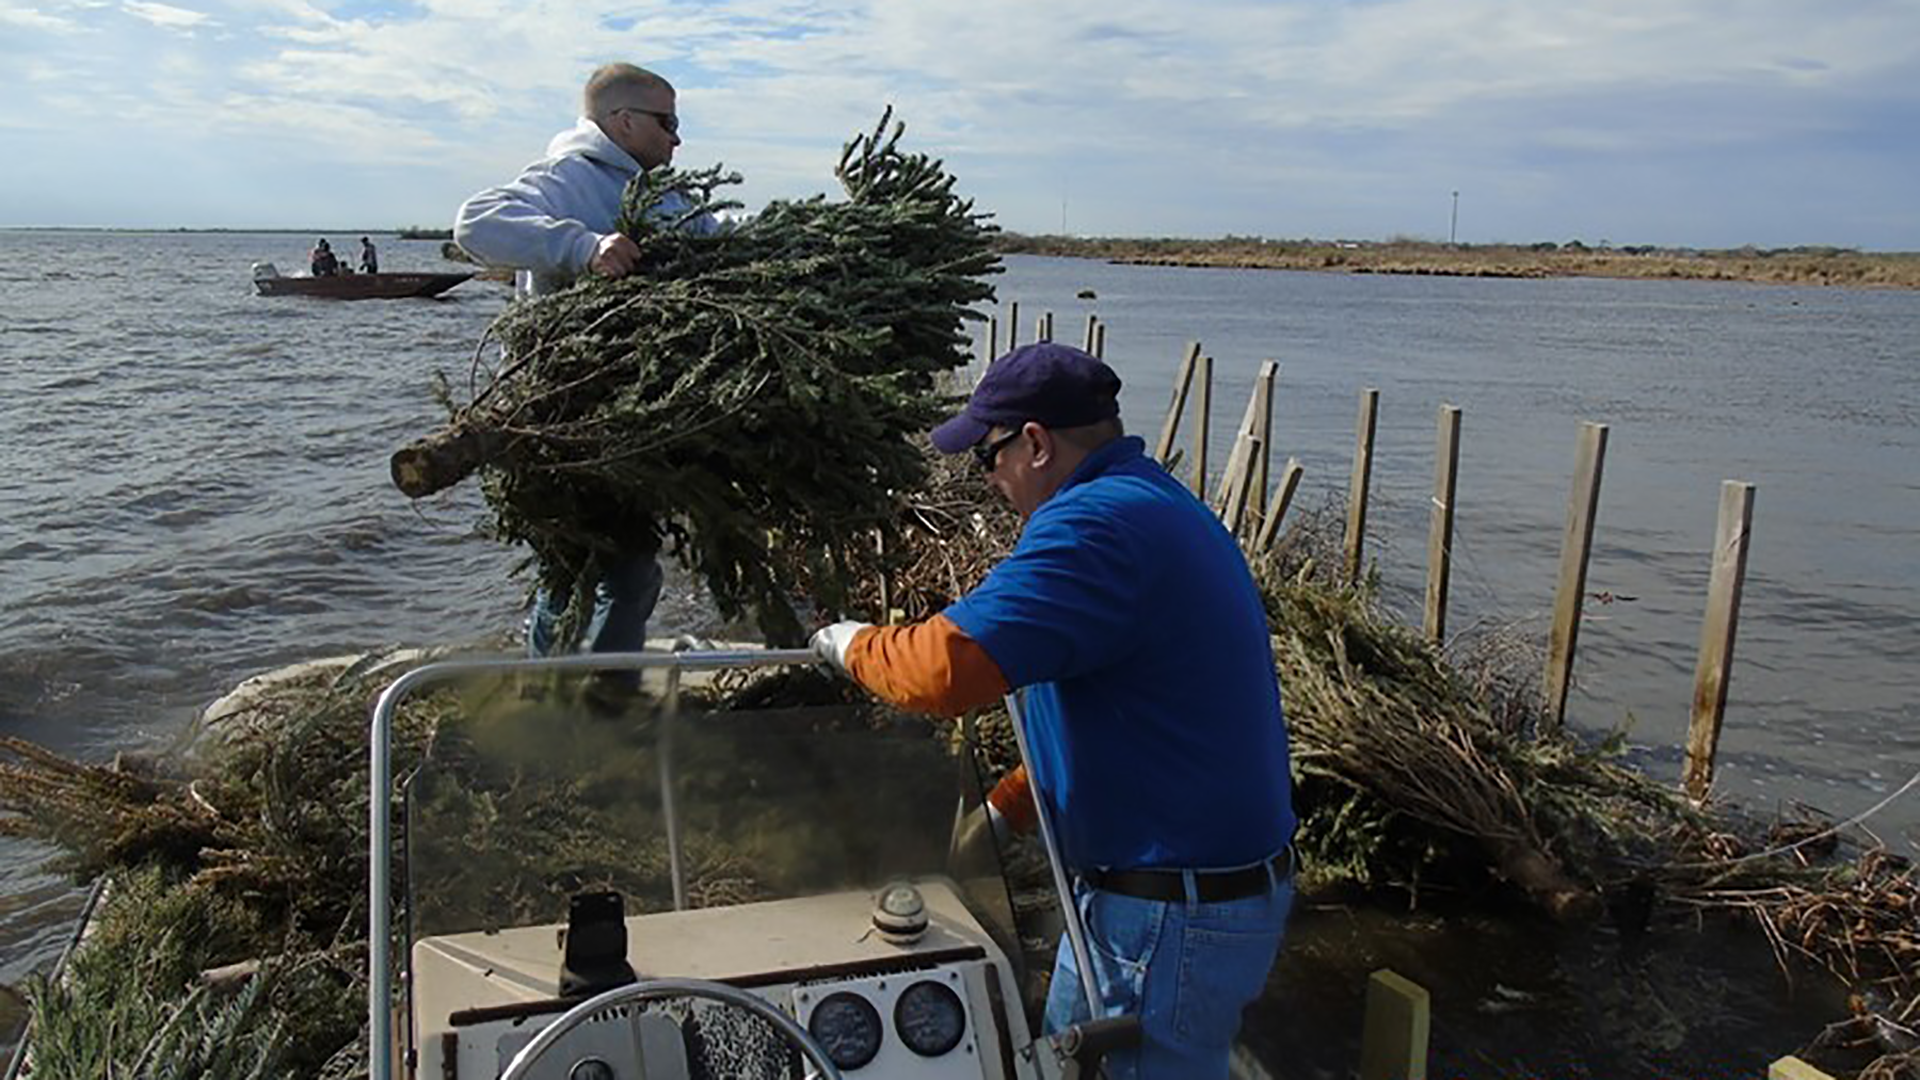 Thousands of recycled Christmas trees will defend Louisiana's coast